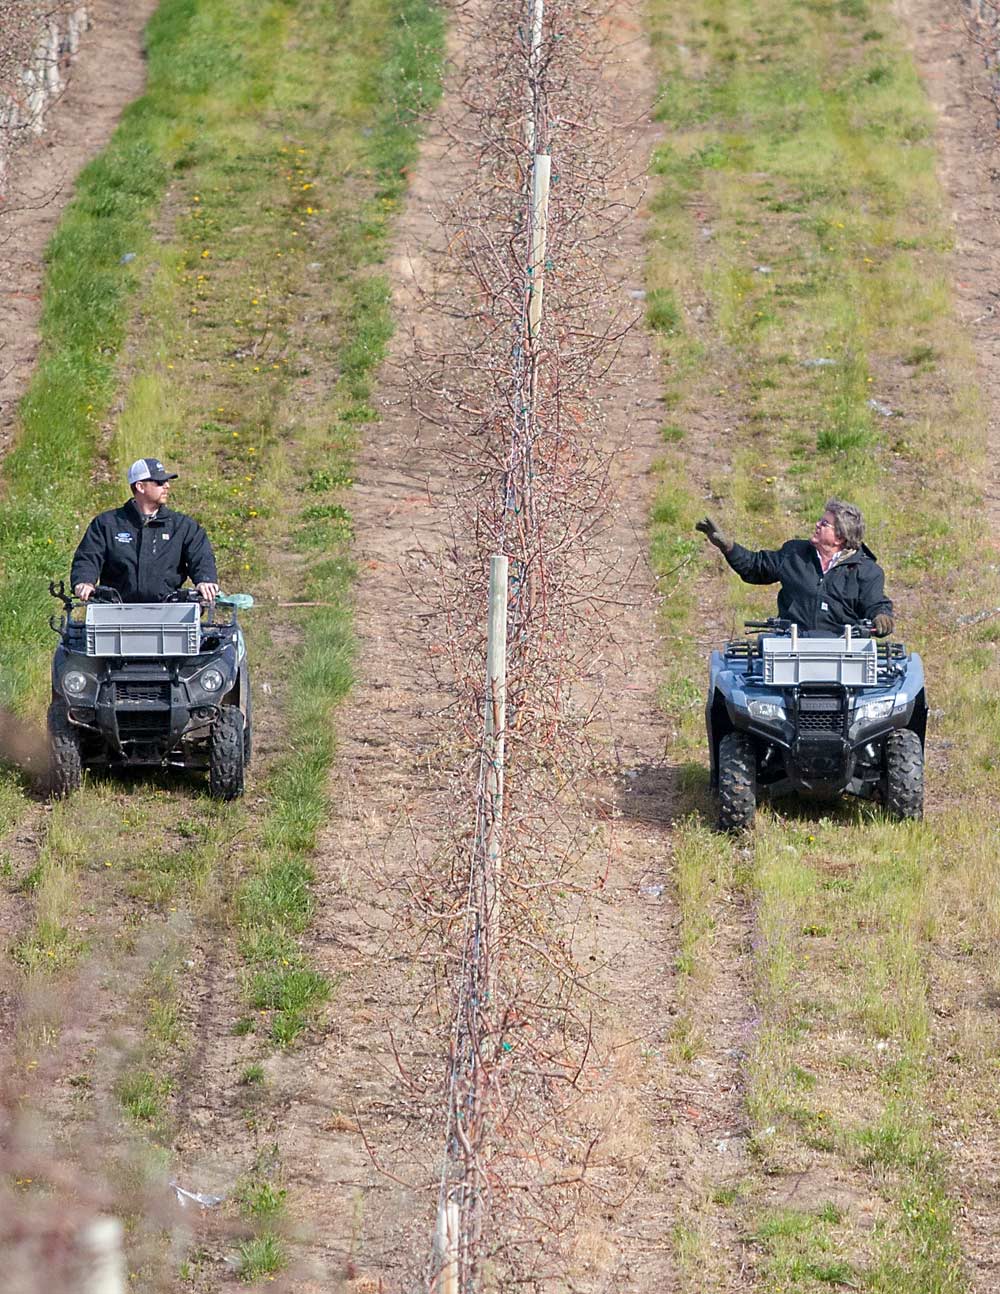 Longtime G.S. Long tree fruit consultant Dan Griffith, right, uses his four-wheeler to evaluate return bloom on a Gala block with trainee Grayson Byers on Monday, March 28, 2018, in Roosevelt, Washington. (Ross Courtney/Good Fruit Grower)